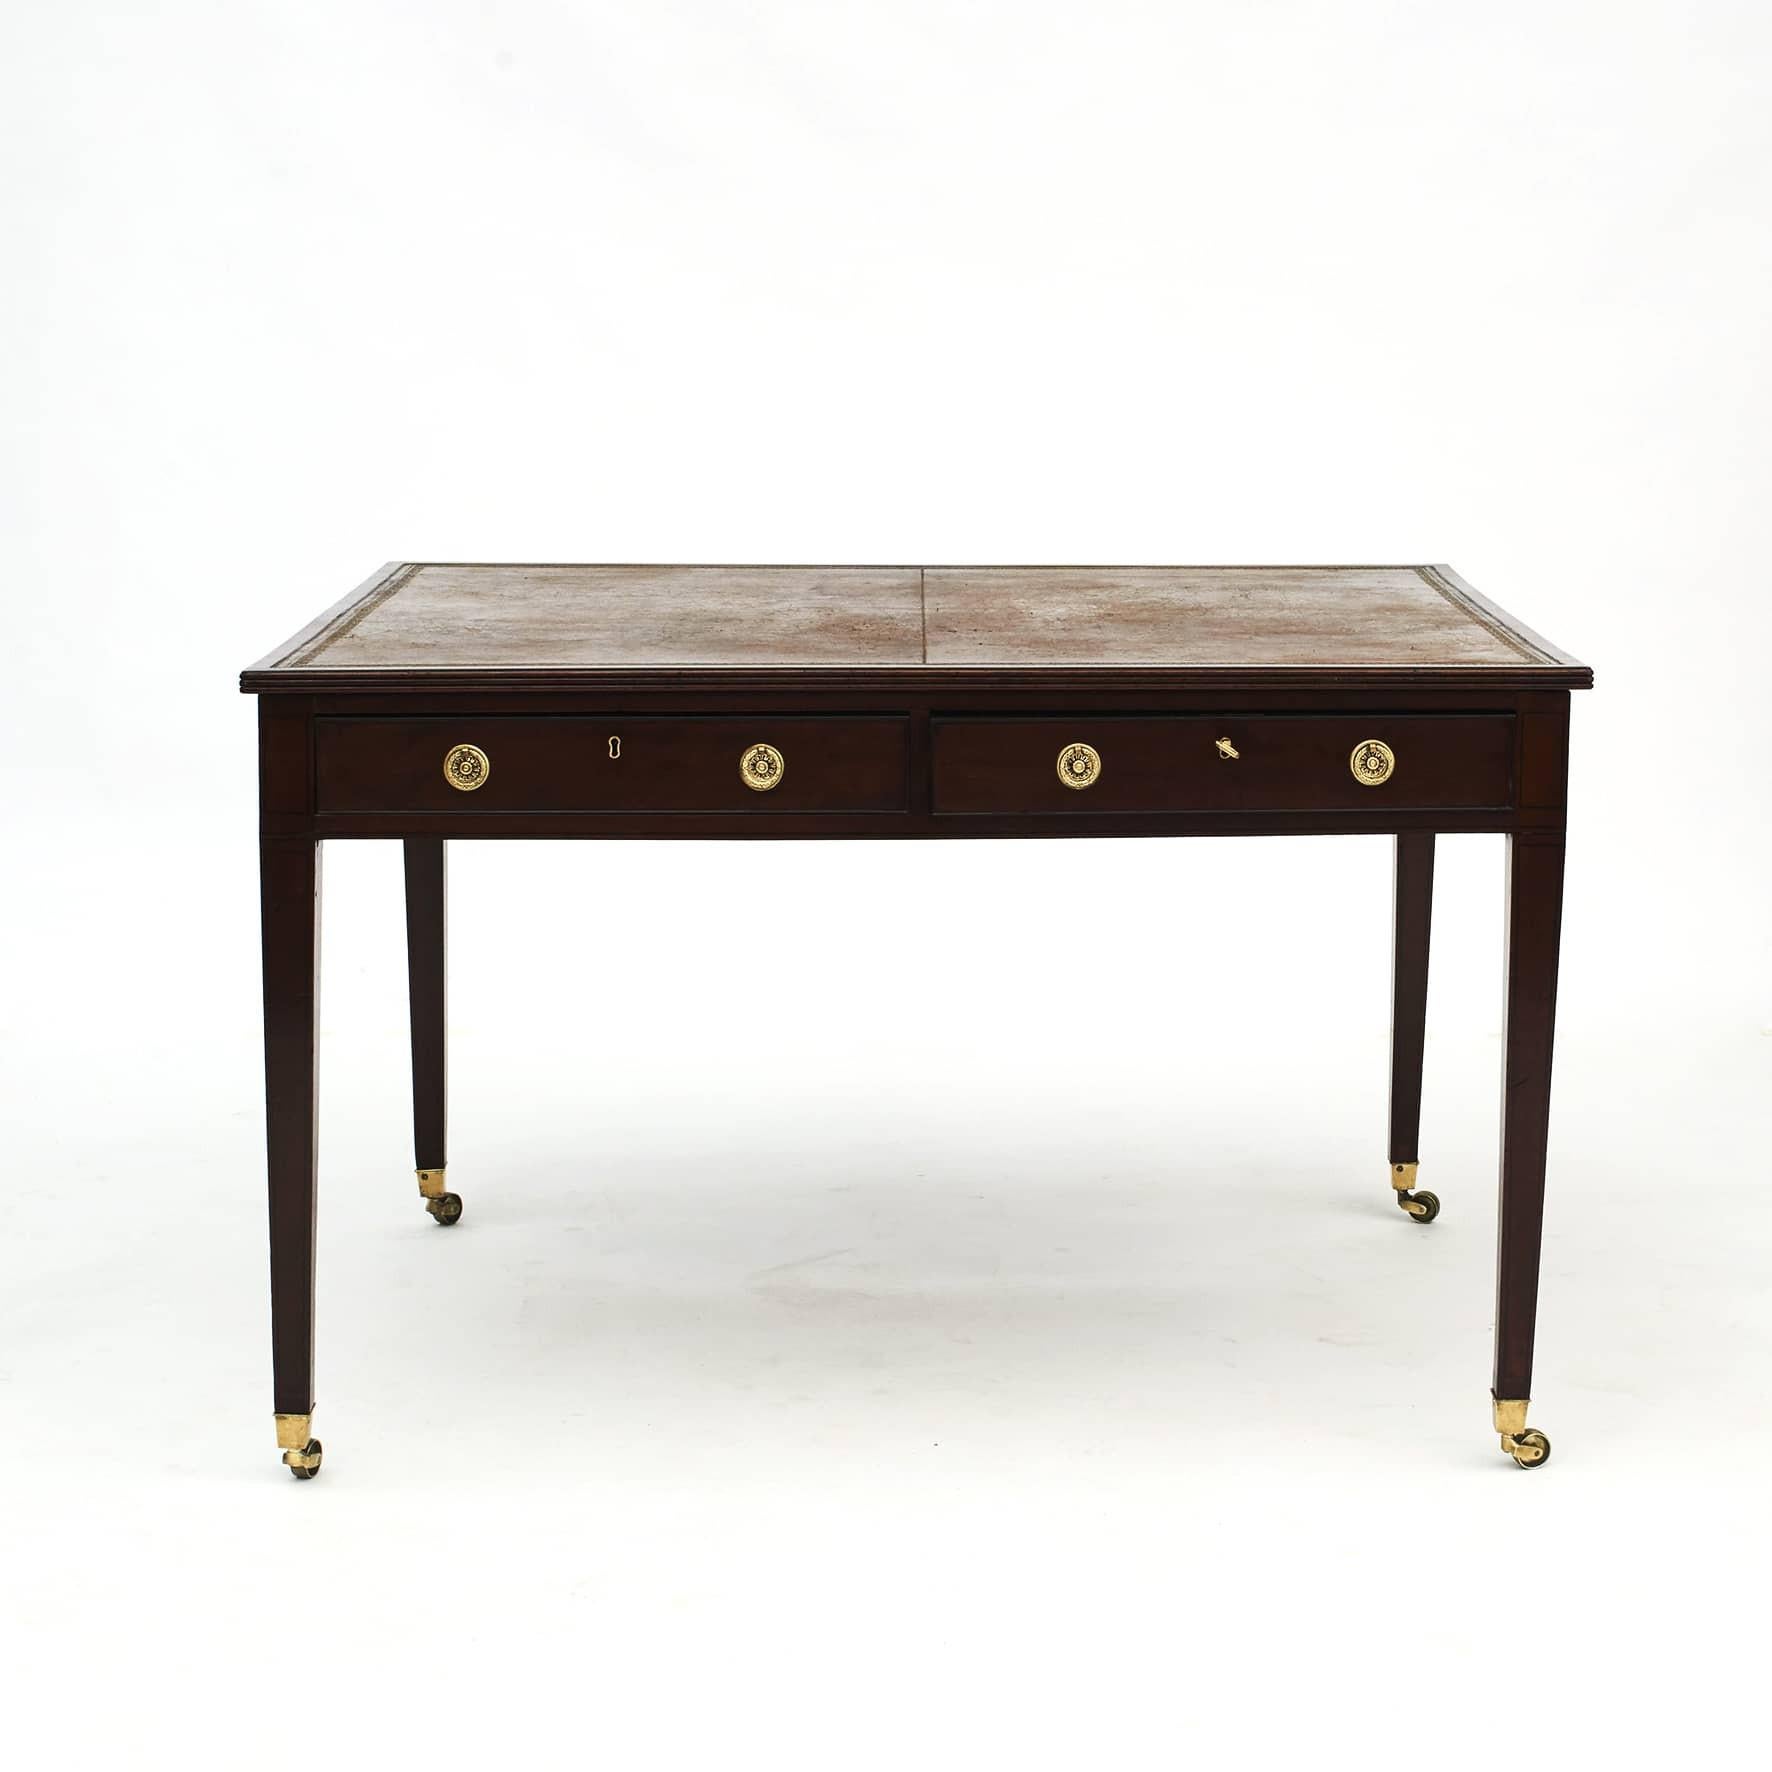 Early 19th century Regency mahogany Partner's desk.
The rectangular top features a moulded edge with an inset leather writing surface. 2x2 front drawers, the sides is finished with decorative faux drawers.
Raised on four legs with dark wood